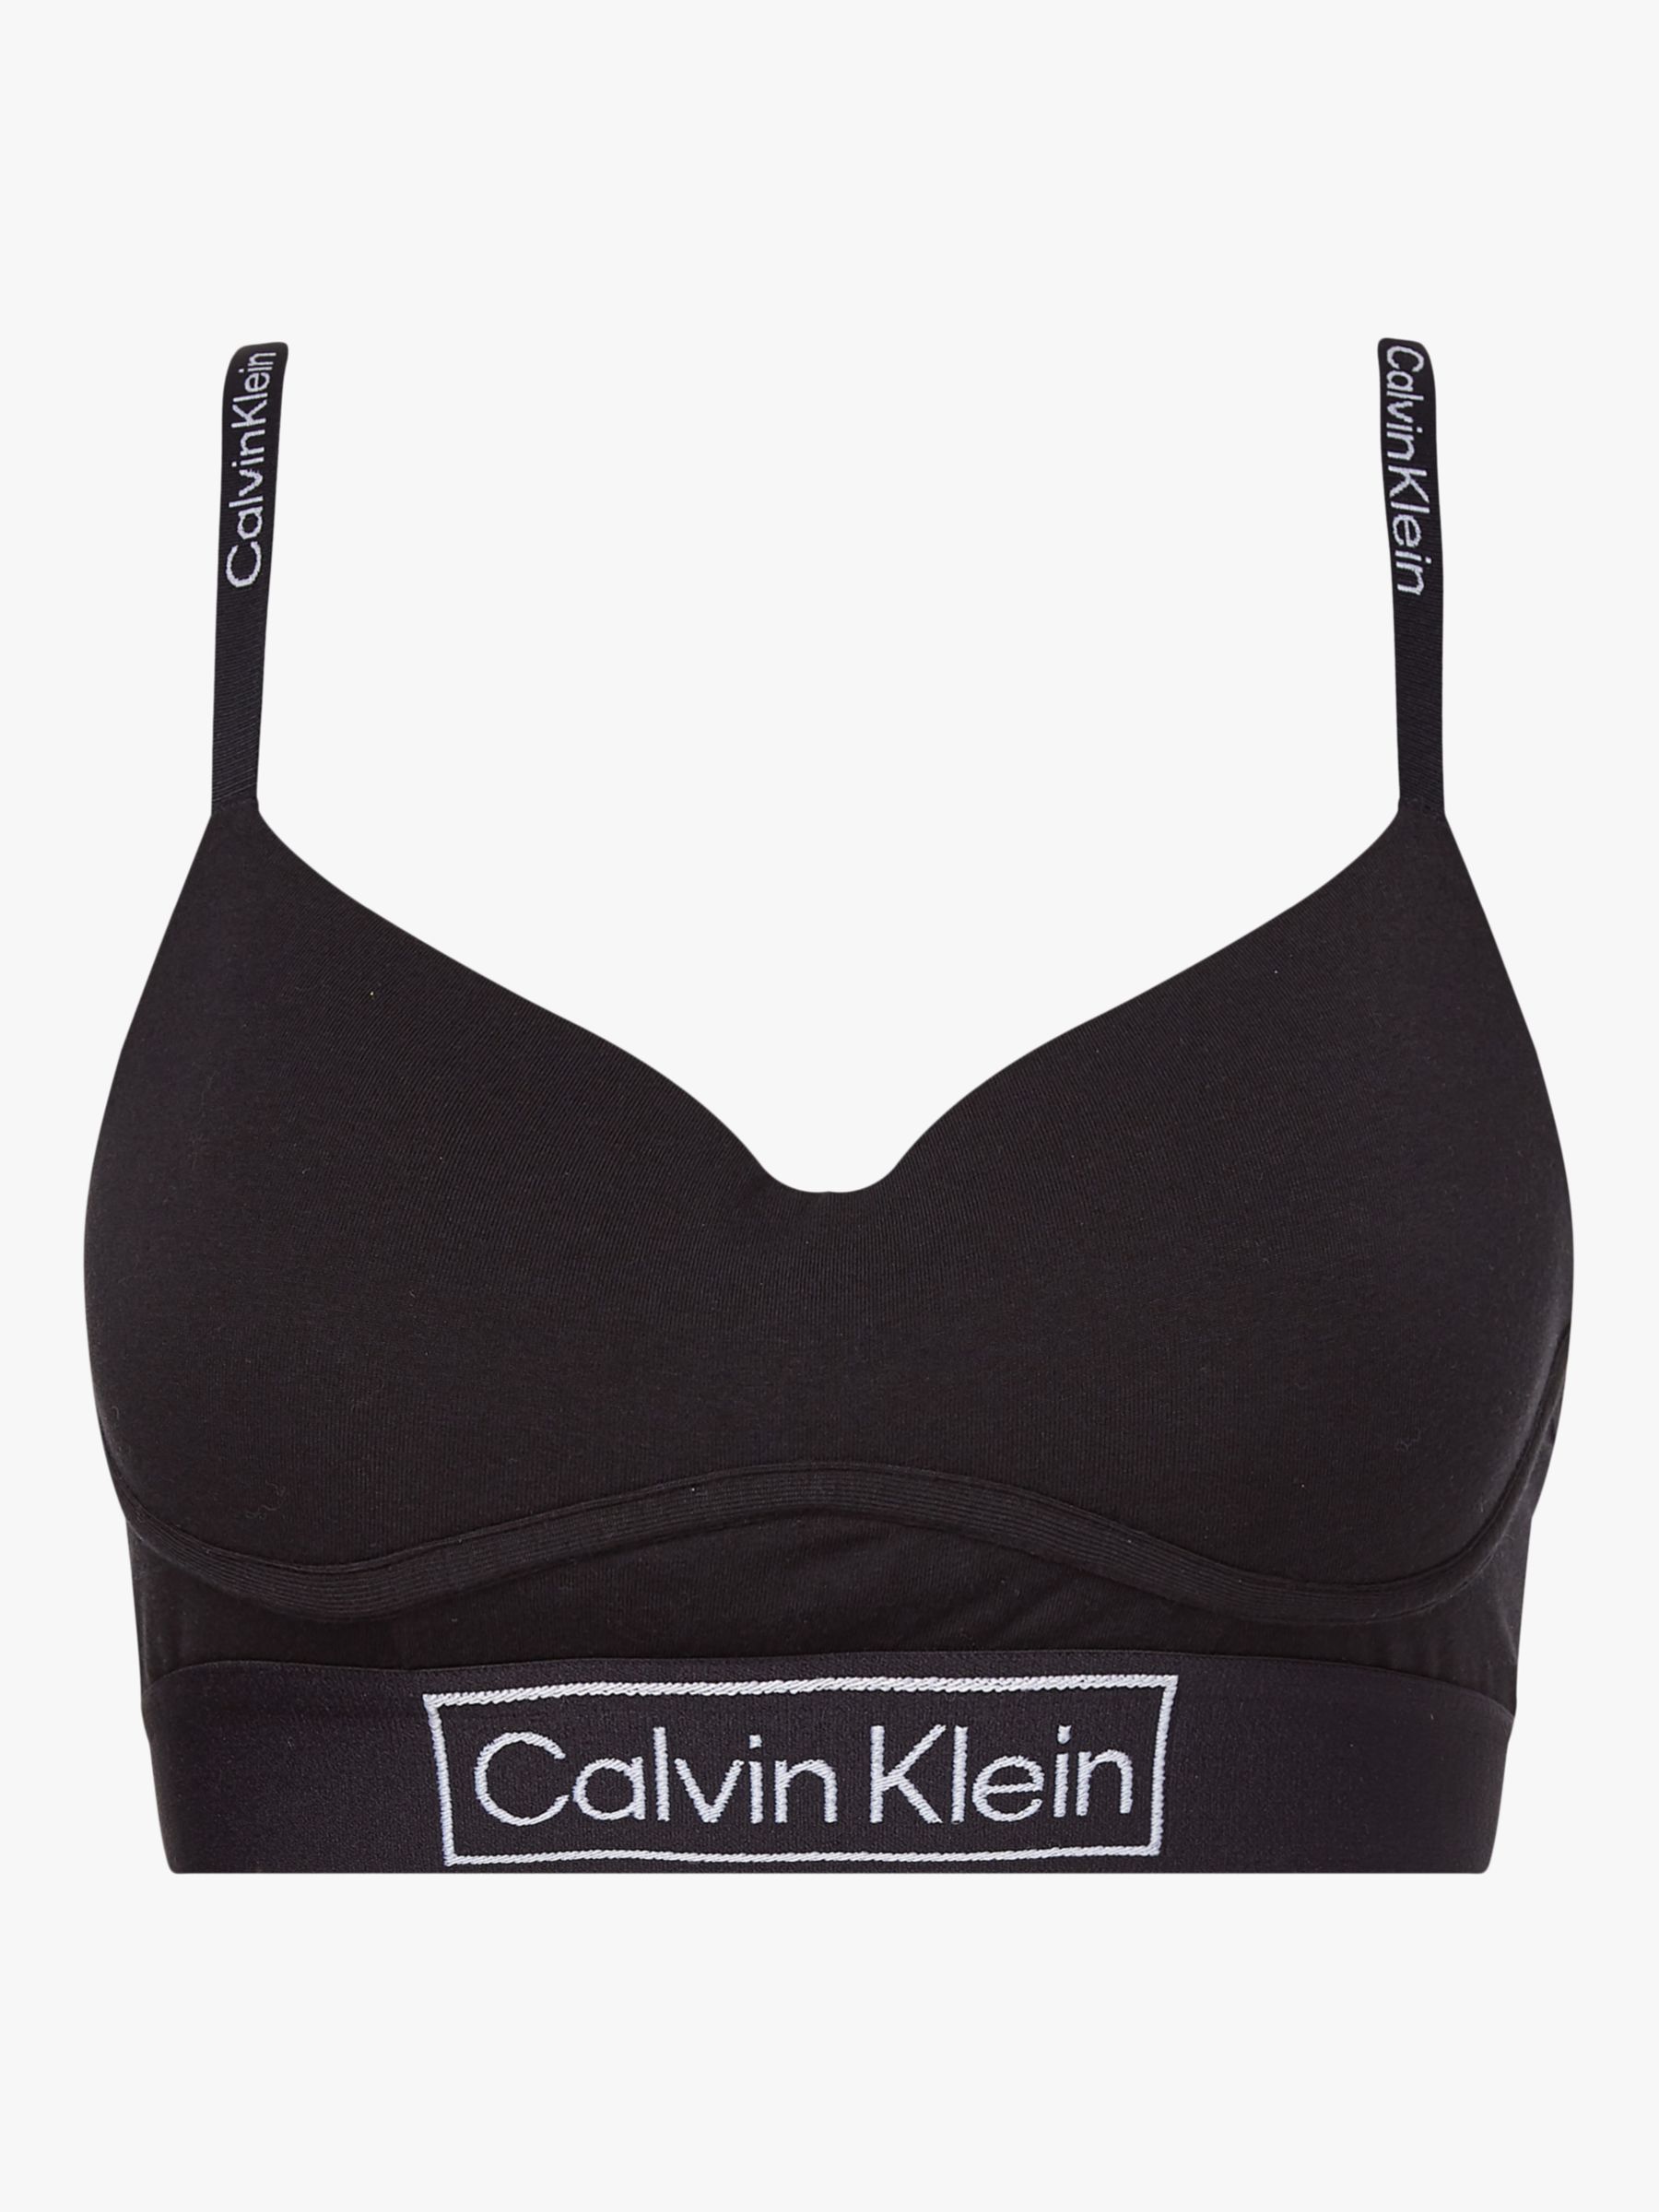 Calvin Klein Women's Reimagined Heritage Pride Unlined Bralette, Black,  X-Small at  Women's Clothing store